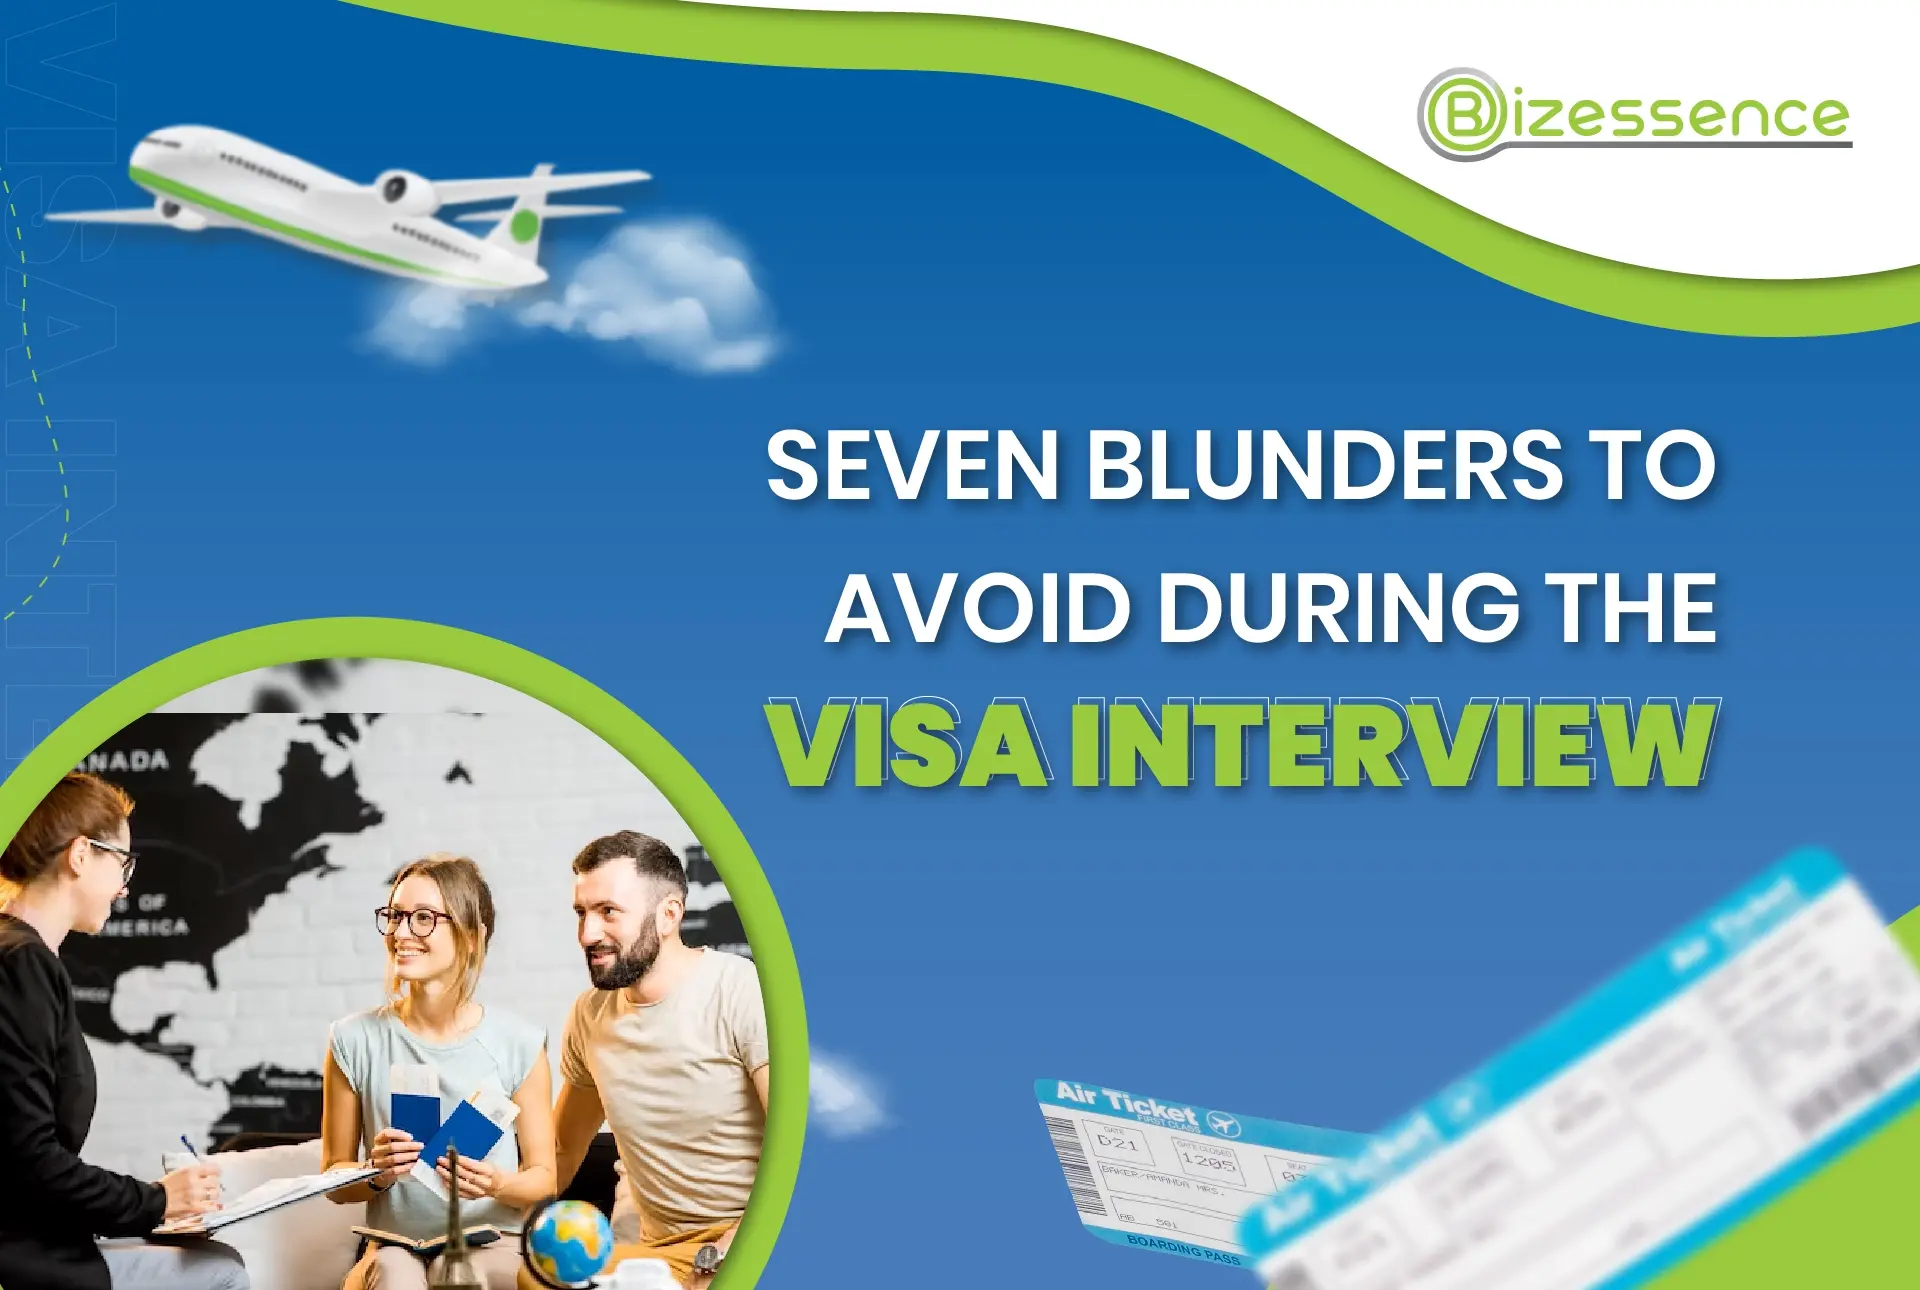 7 blunders to avoid during the visa interview.